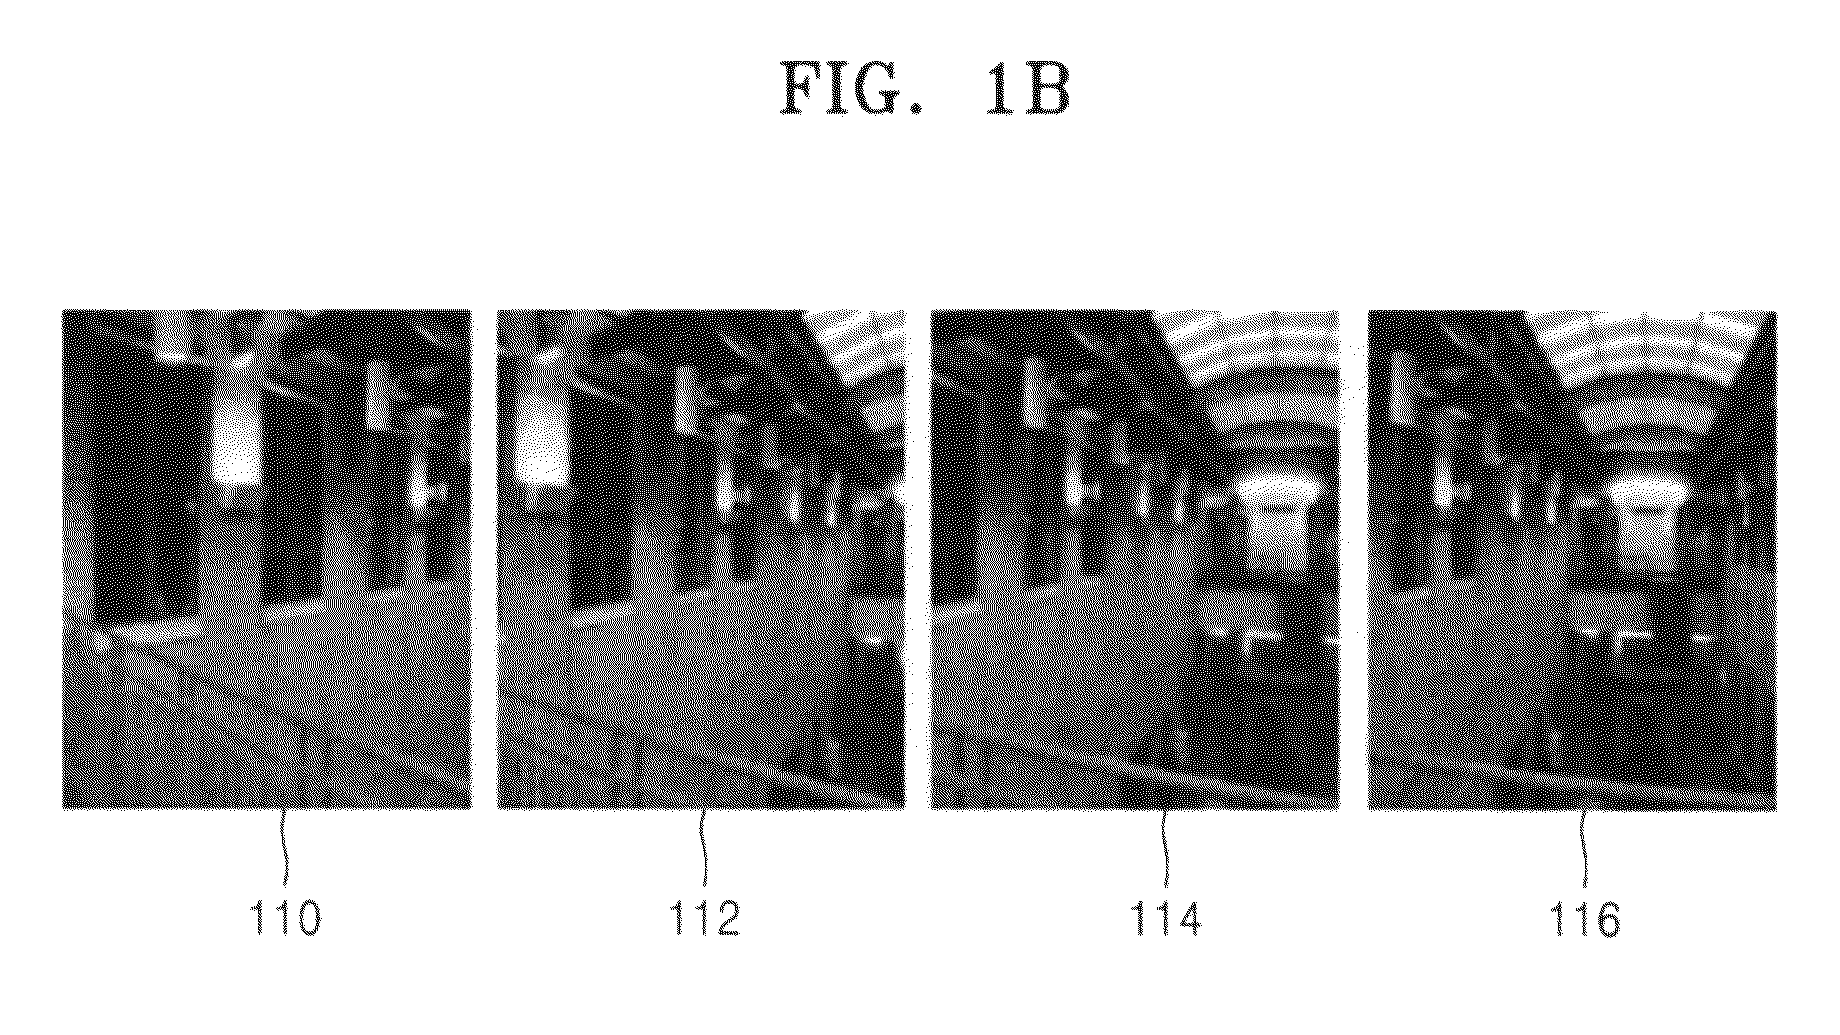 Apparatus, method, and medium for generating panoramic image using a series of images captured in various directions